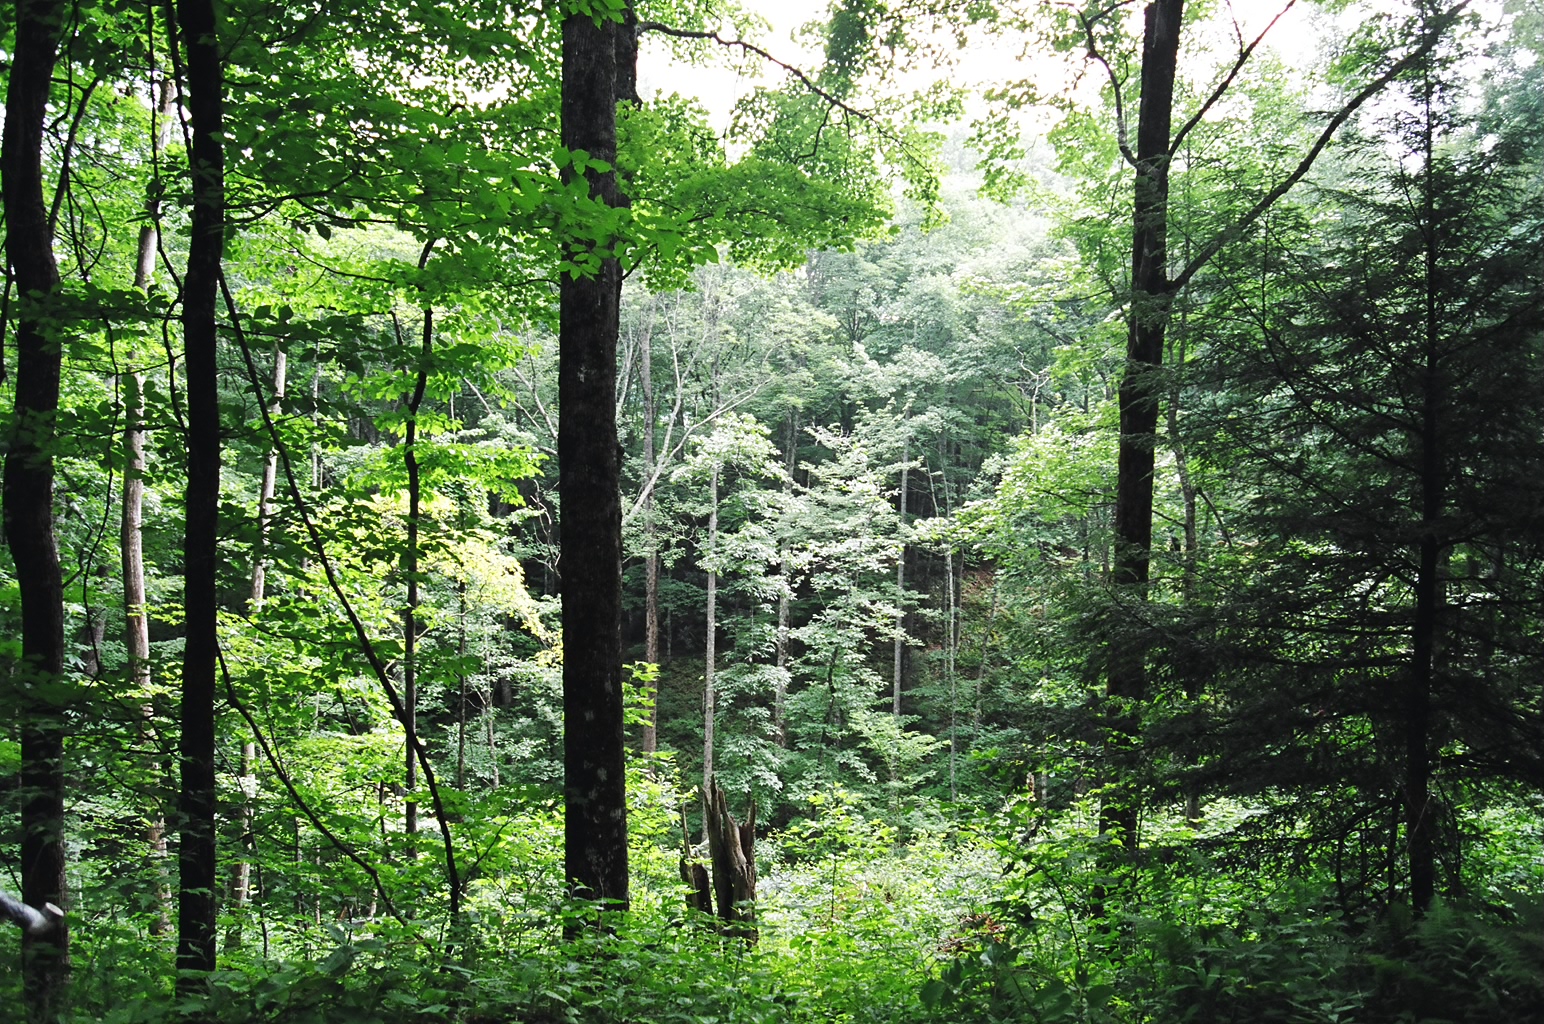 “Epidemiological” Study Demonstrates Climate Change Effects On Forests